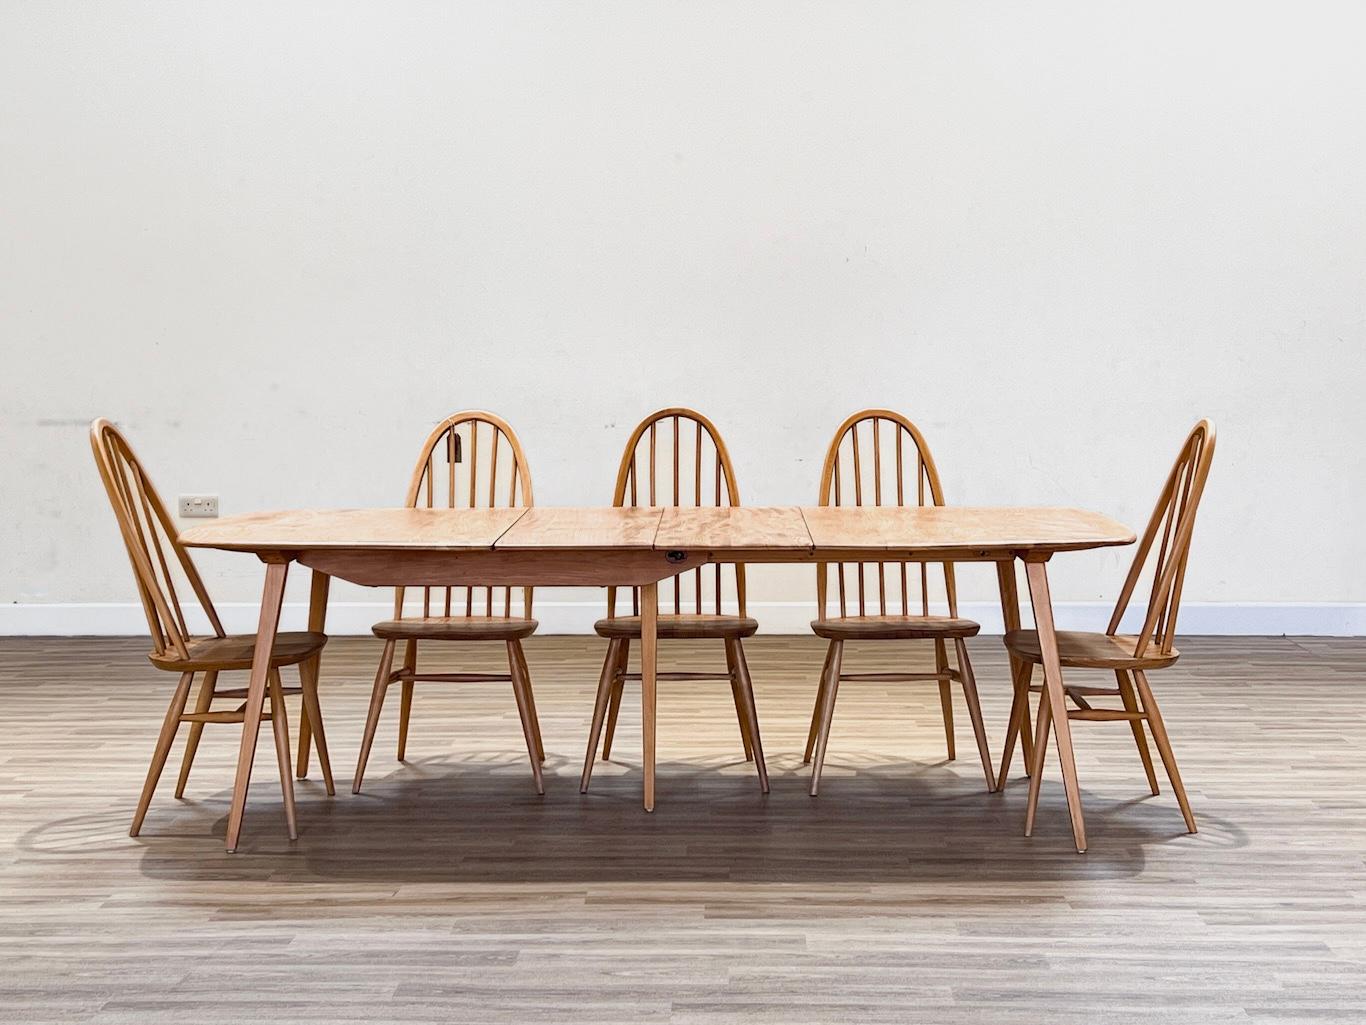 These chairs were designed by Luciano Ercoloni in England during the 1960s. They are part of the Windsor collection, which is renowned for its timeless beauty and expert craftsmanship. The chairs are handcrafted using high-quality Elm wood, which is